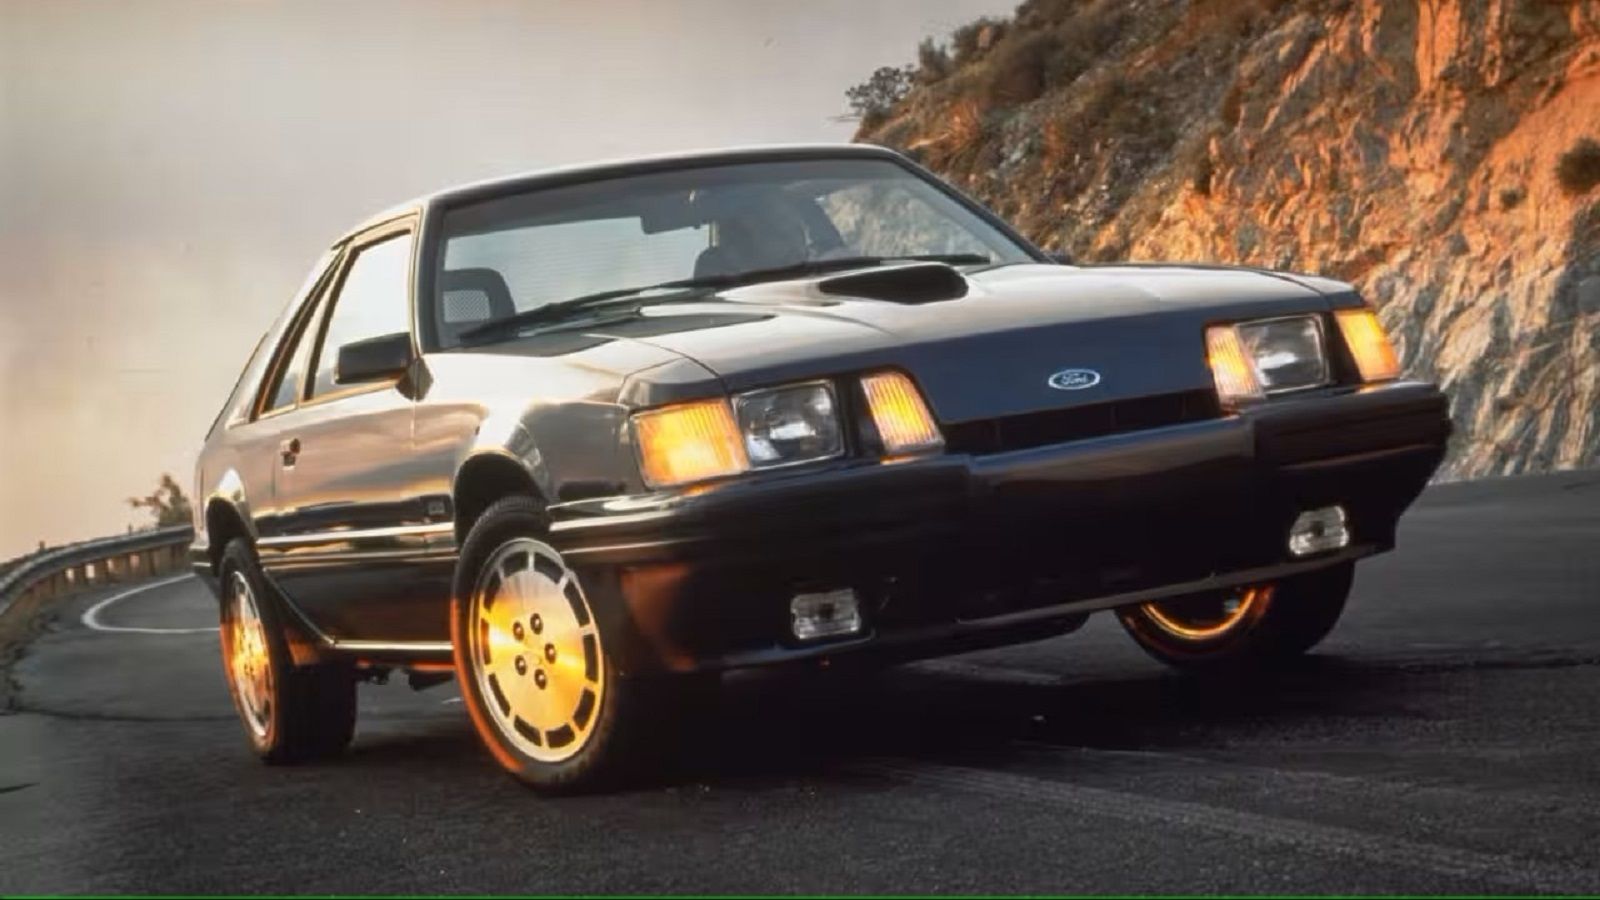 A parked 1984 Ford Mustang SVO